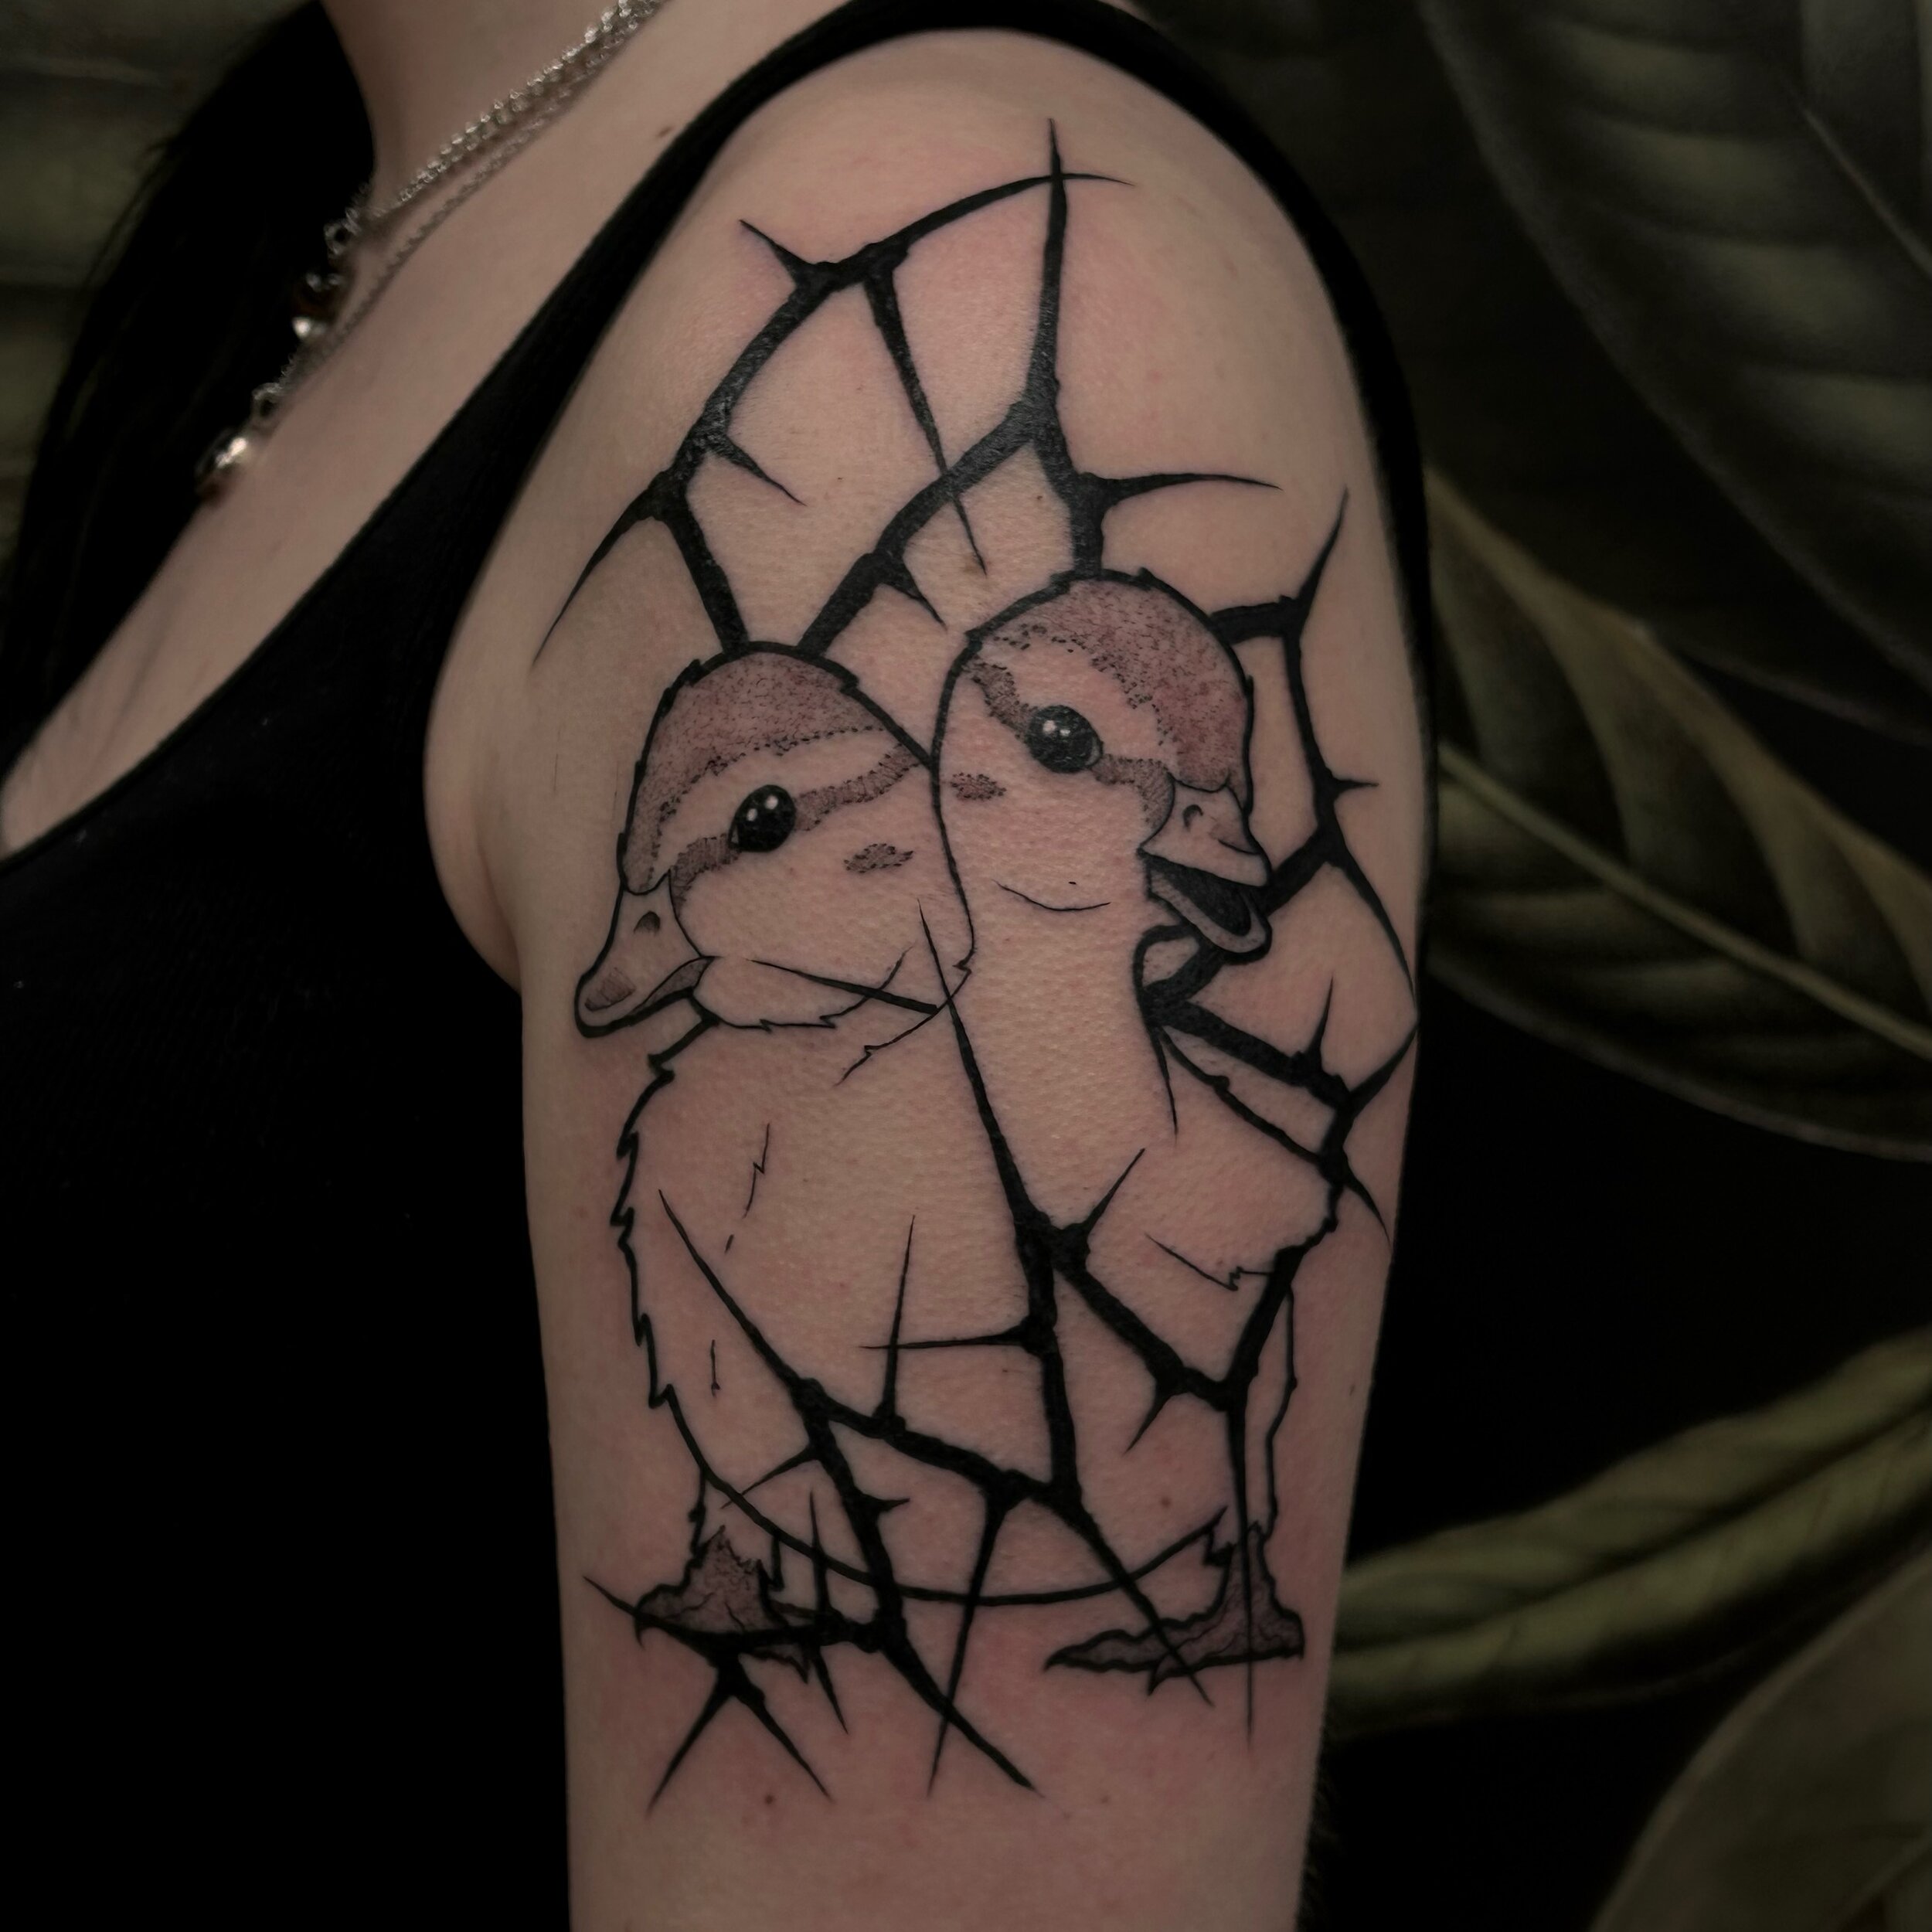 Conjoined ducklings 🖤🐥 made at @springfevertattoo